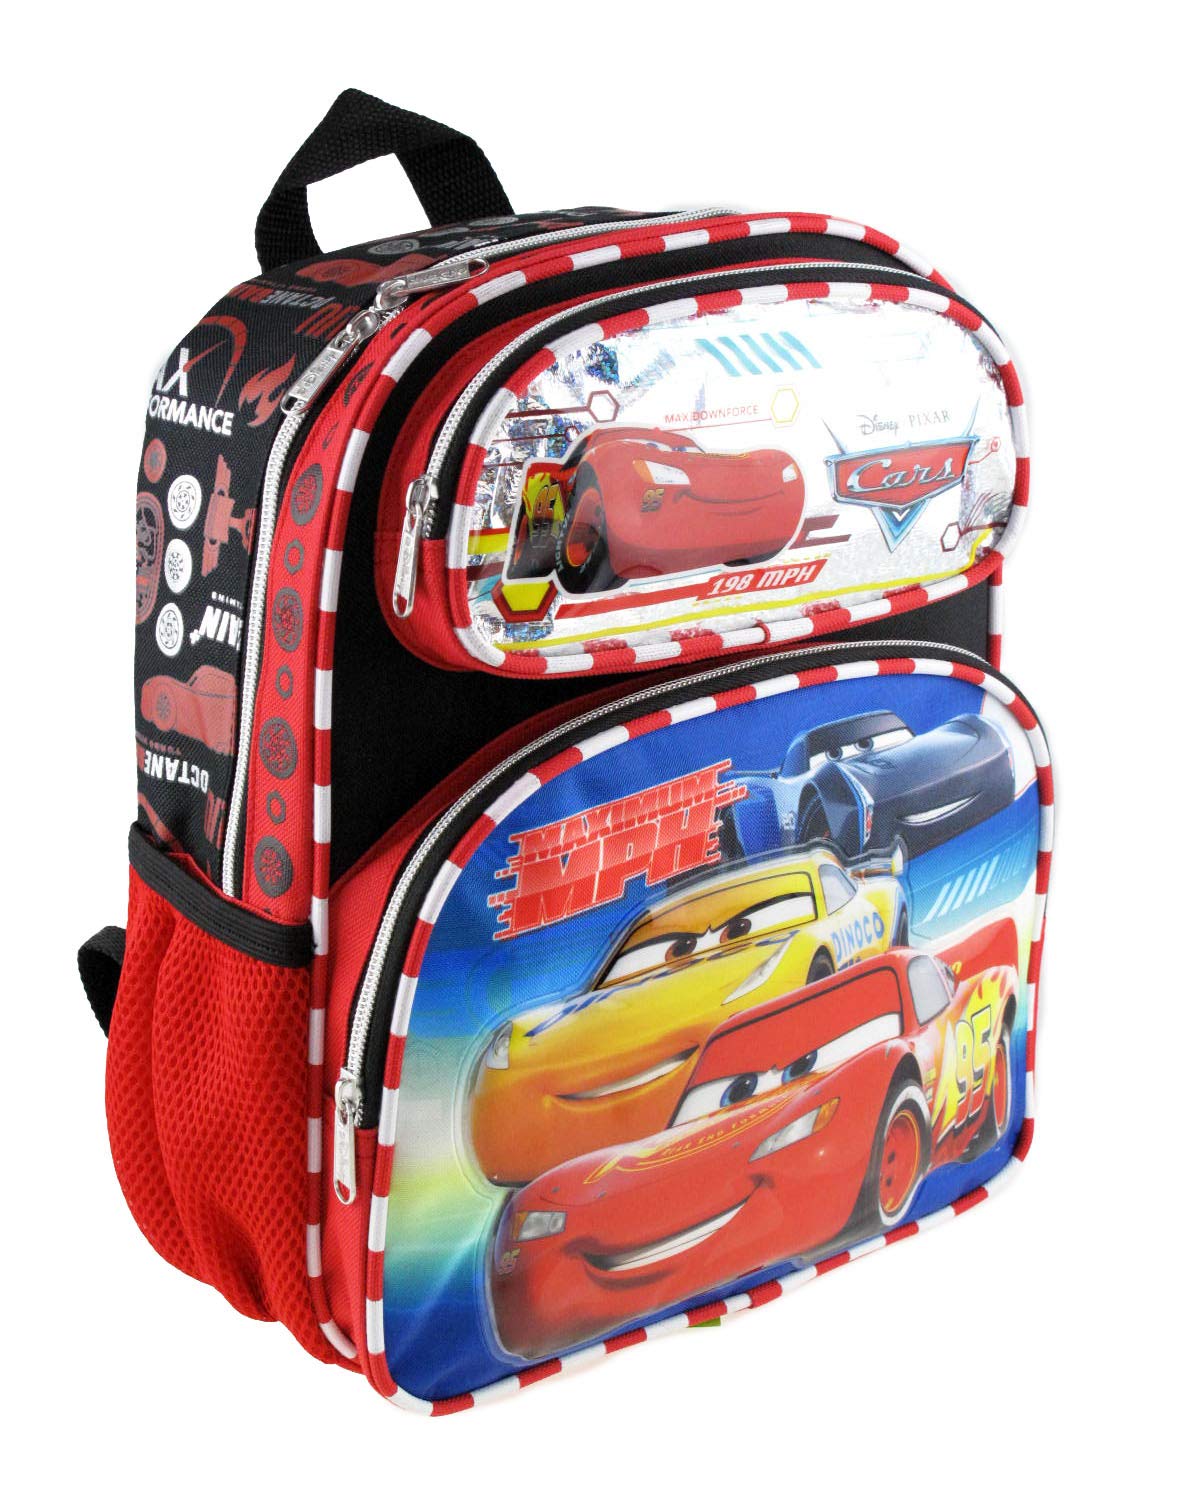 Small Backpack - Disney - Cars Top Engine 12" New 008673 - image 2 of 3